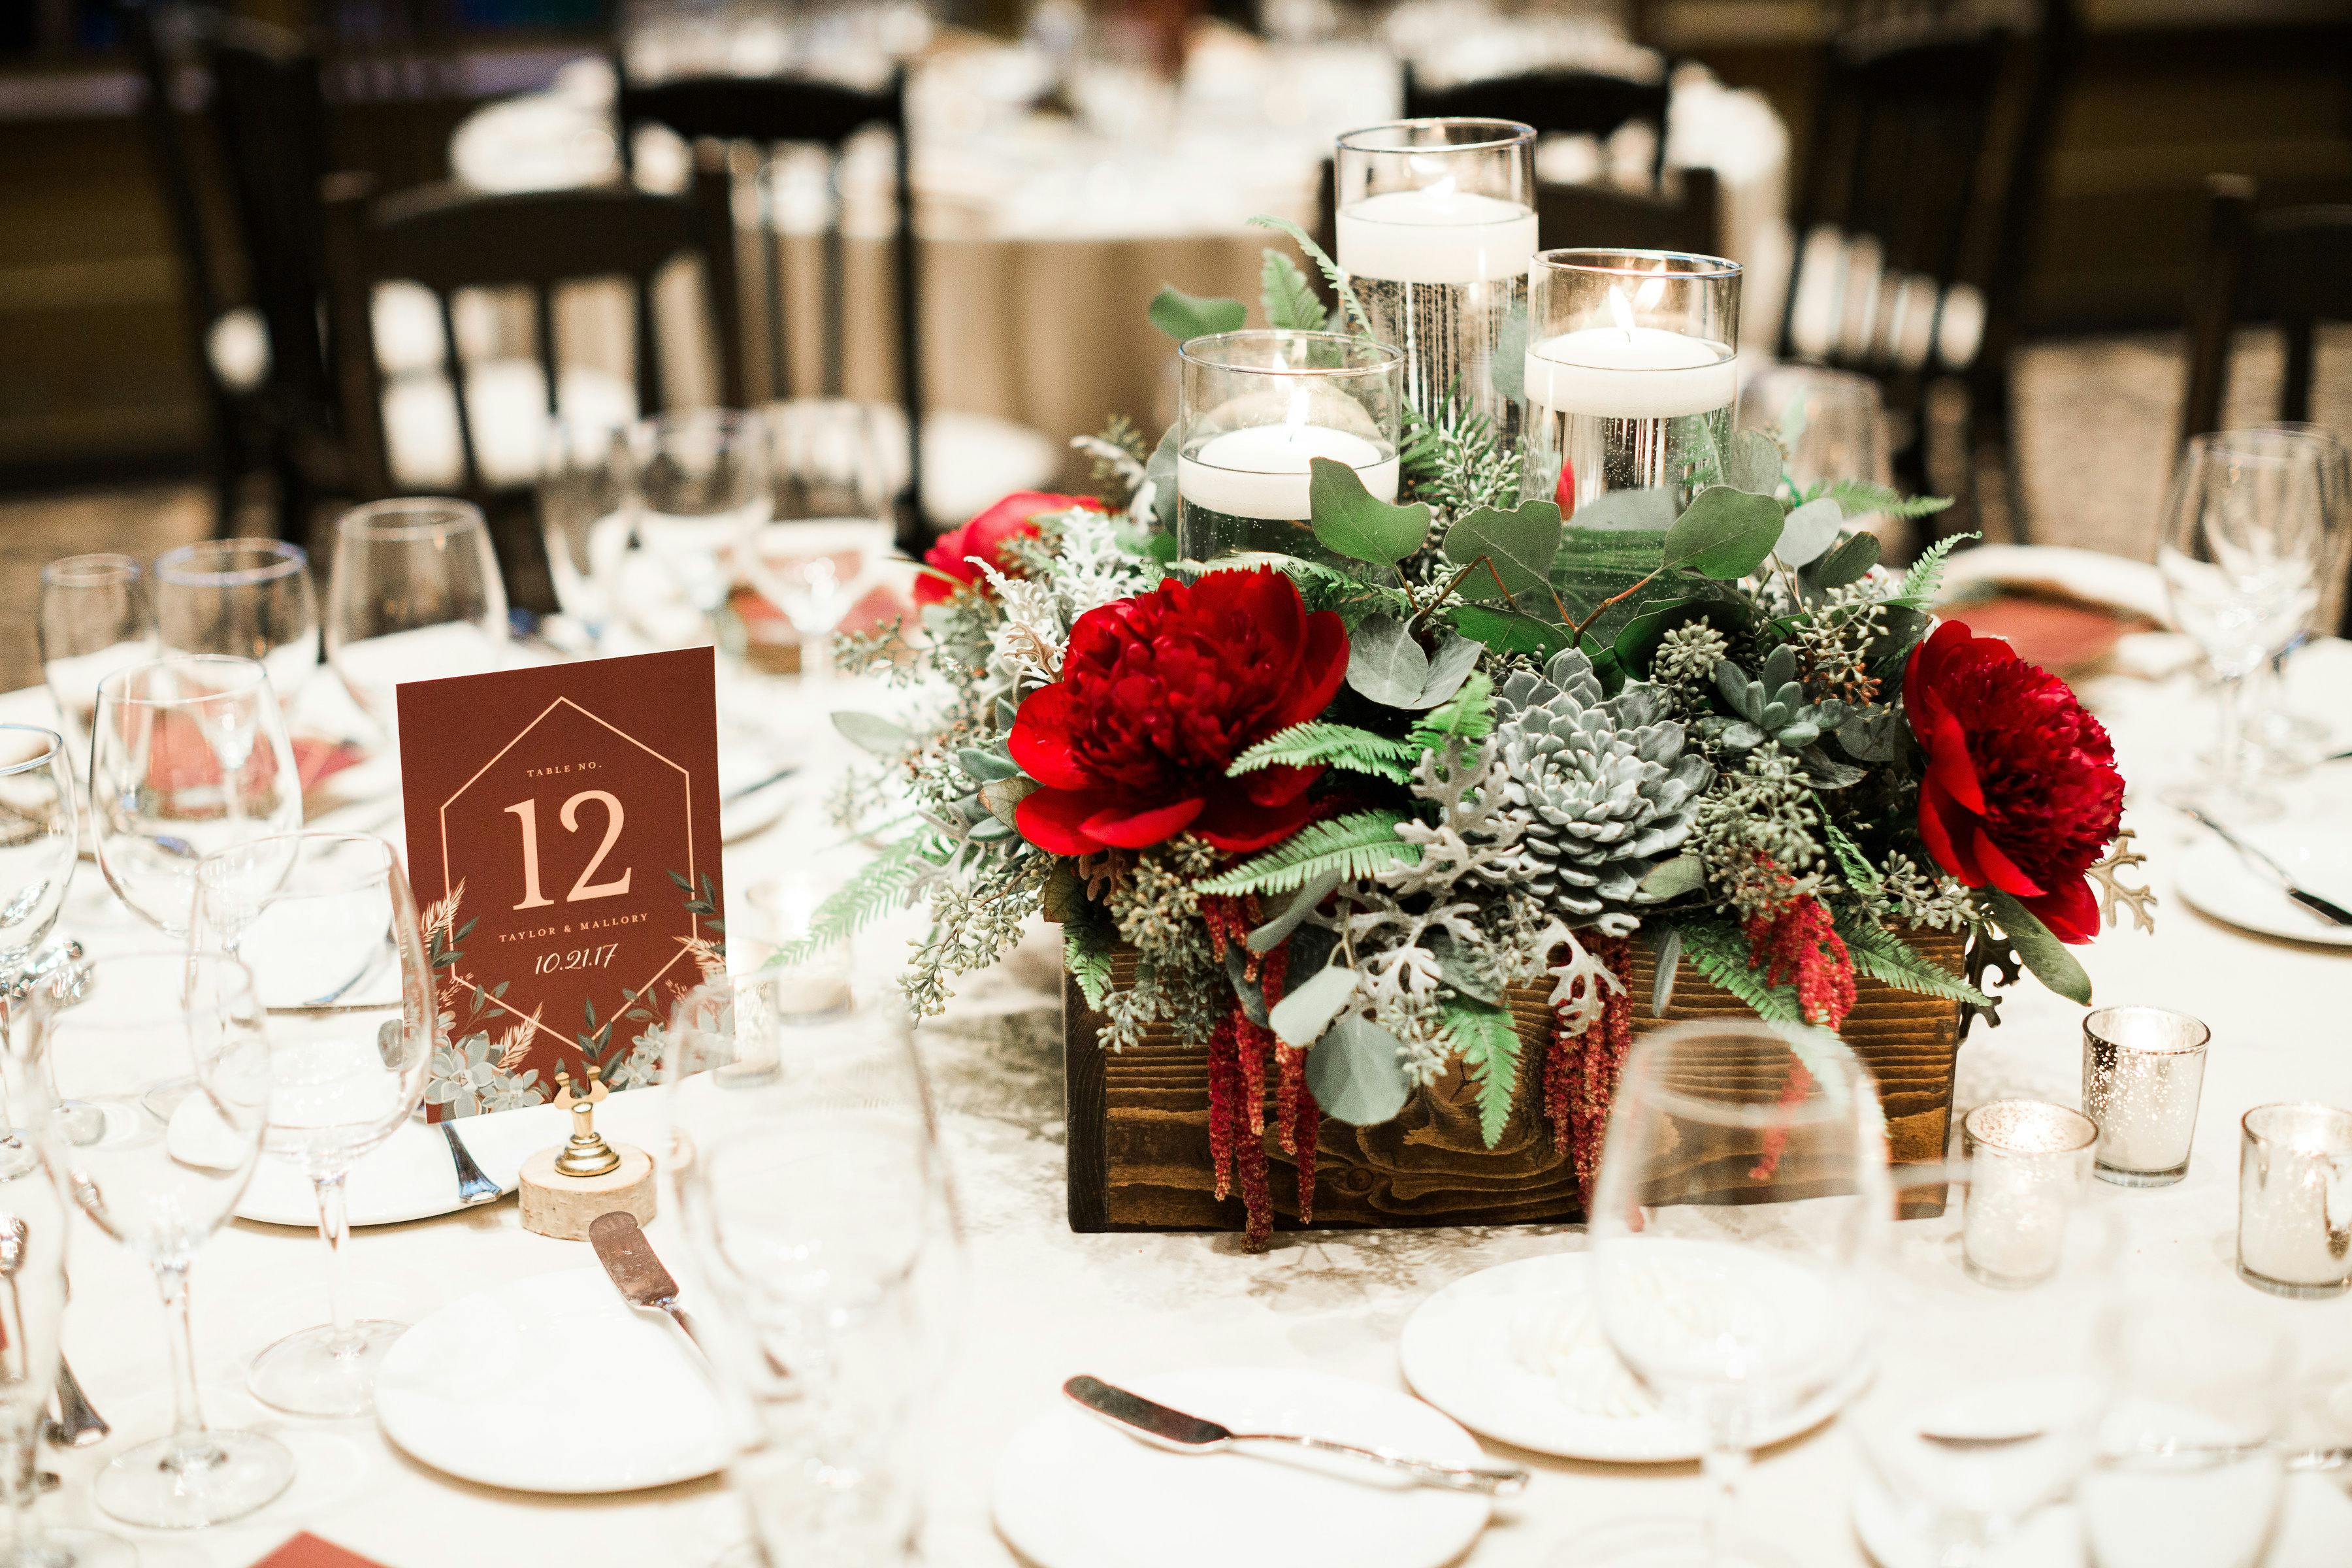 Wedding Centerpiece With Succulents and Red Blooms